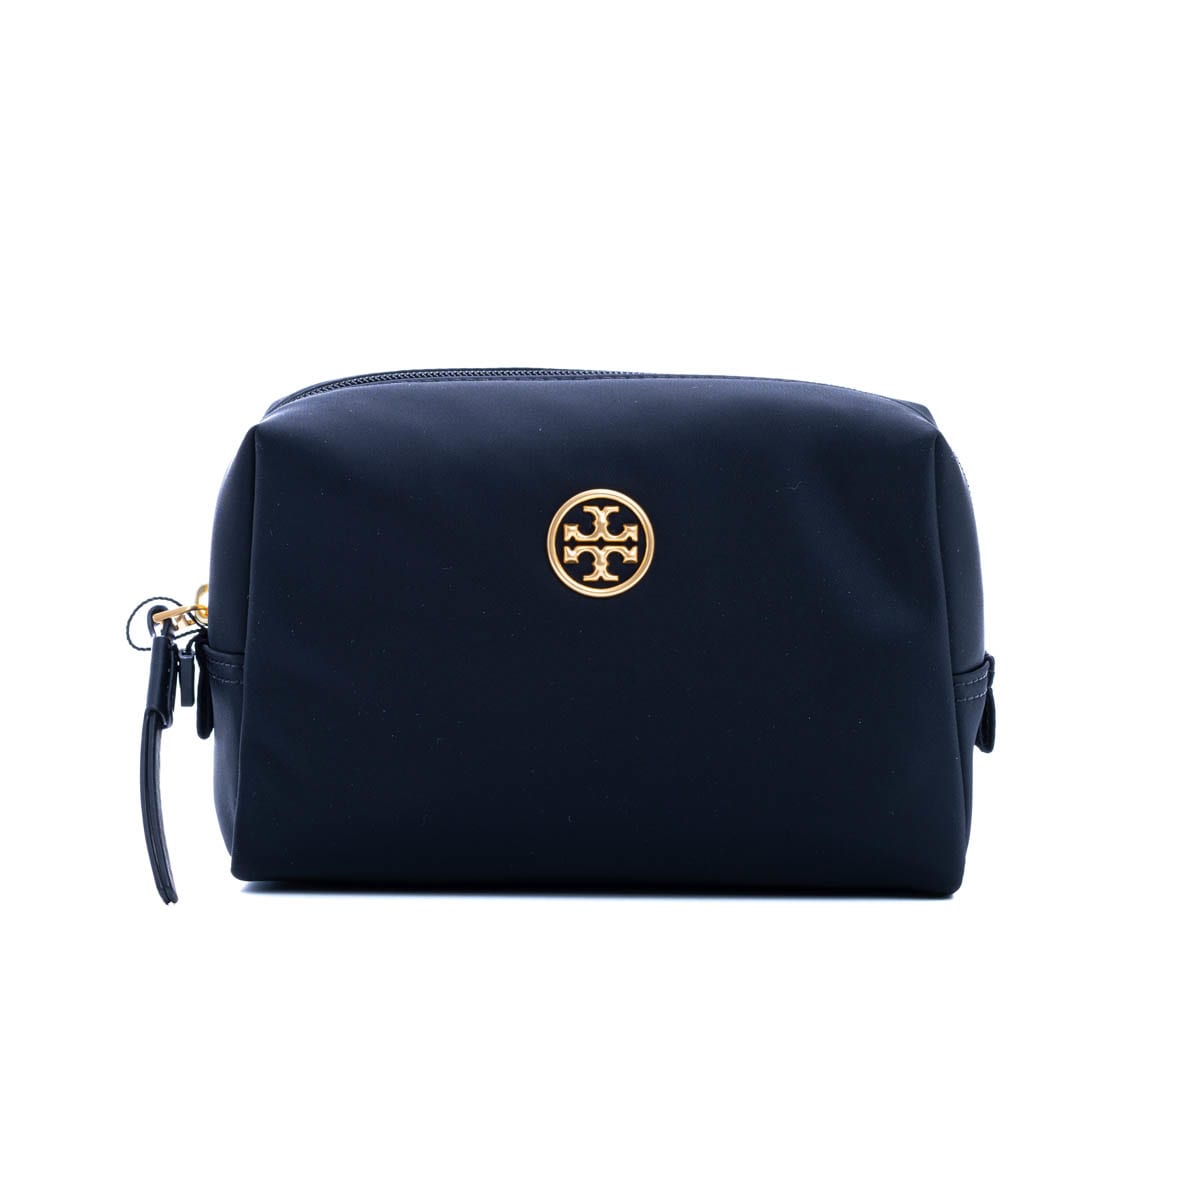 Tory Burch Pouch piper Large